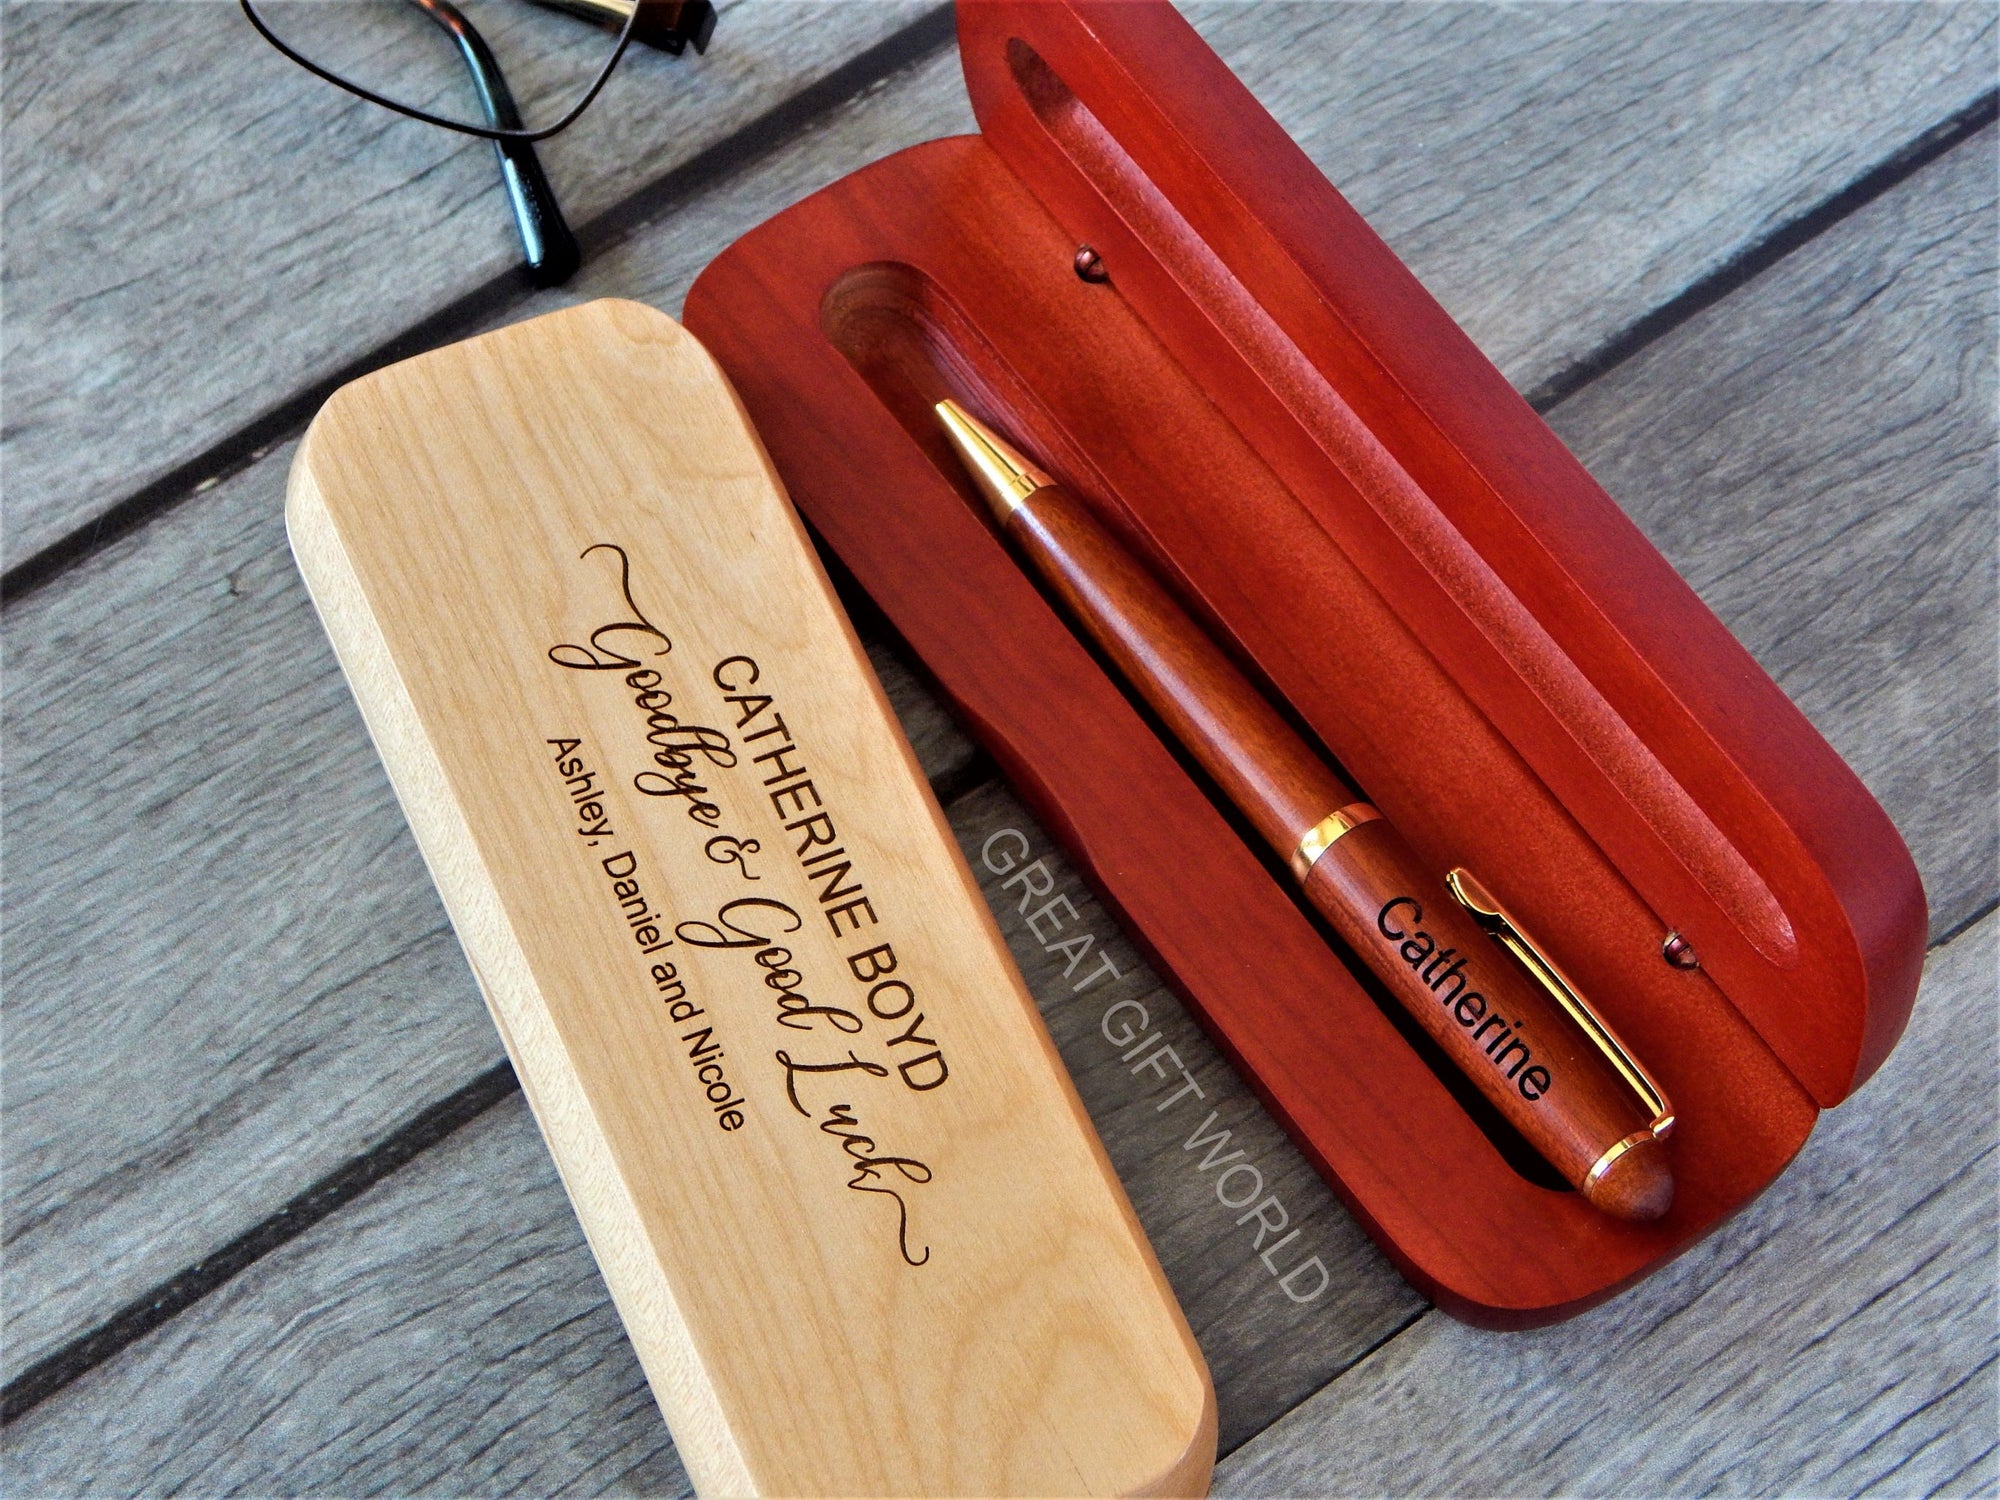 Coworker Leaving Gift | New Job Gift for Boss | Personalized Wood Pen